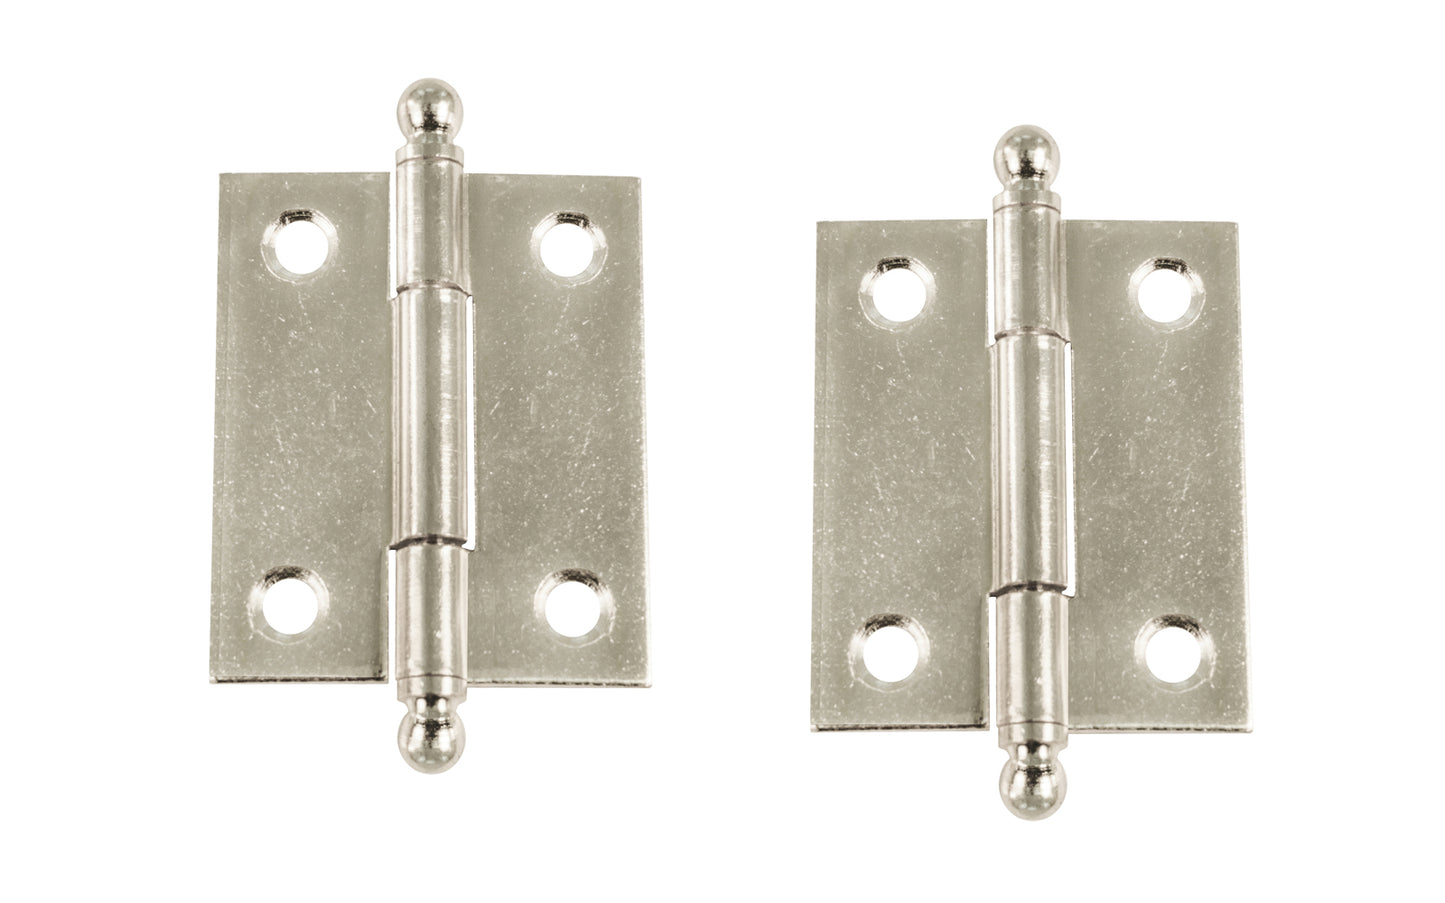 Traditional & classic ball-tip steel cabinet hinges with loose pins. Removable hinge pins makes for easy installation when working with cabinets. 1-15/16" high x 1-5/8" wide. Sold as a pair of hinges. Polished Nickel Finish